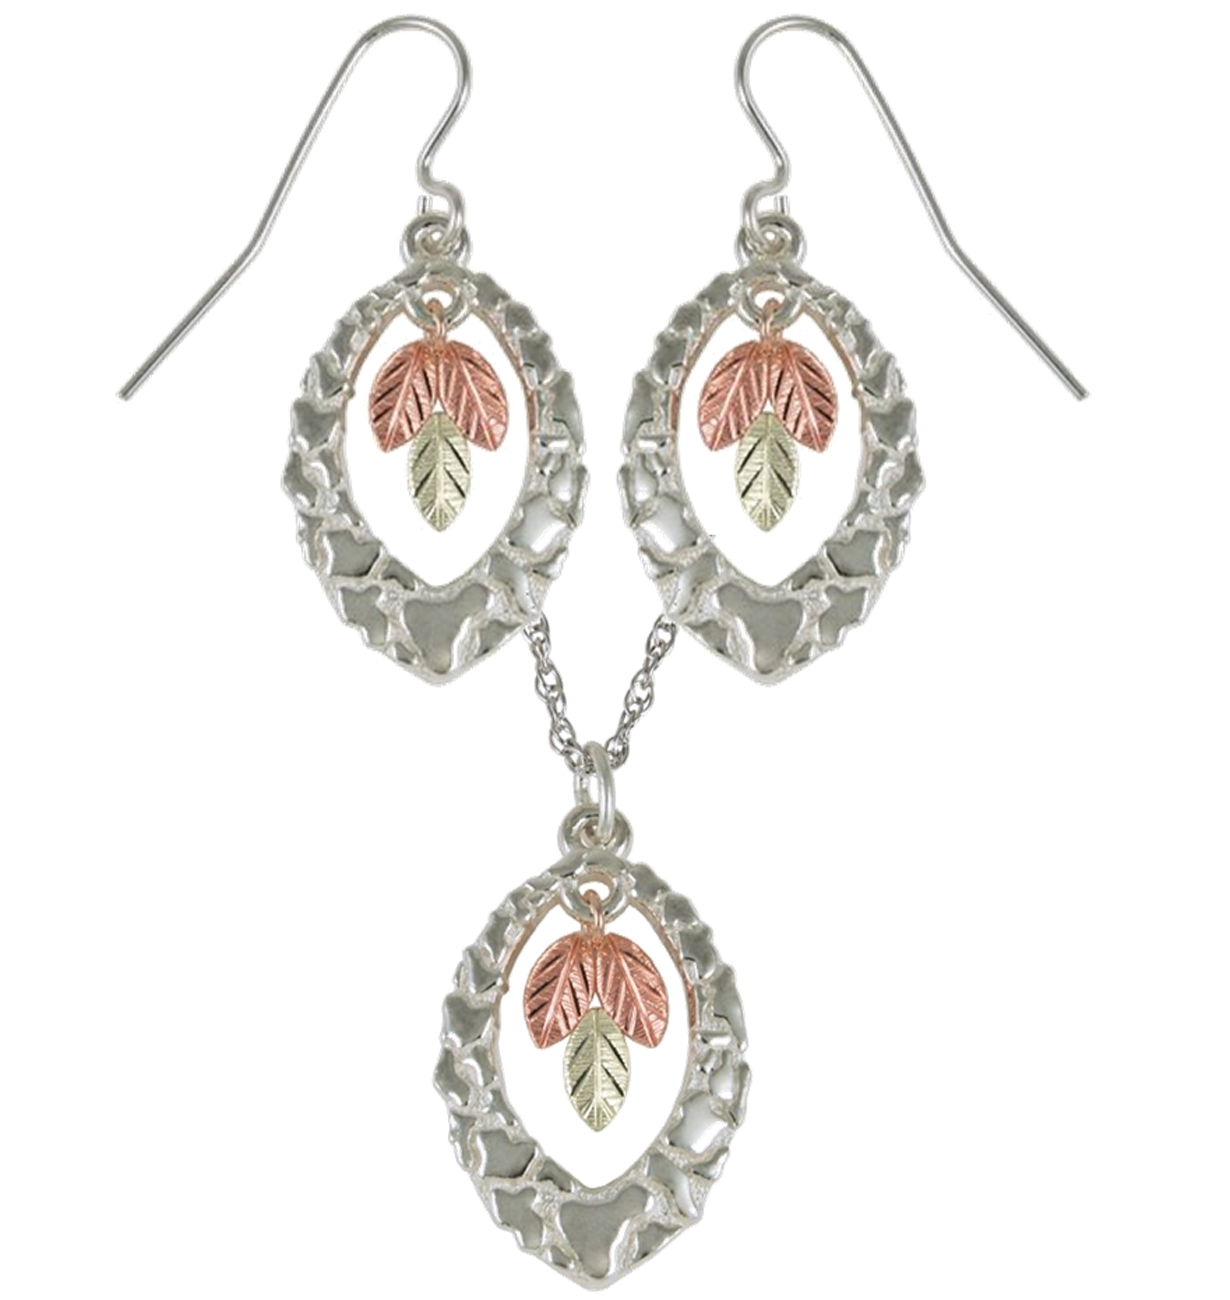 Nugget finished, cut-out leaf dangles earring and necklace jewelry set in sterling silver, 12k rose gold, 12k green gold in Black Hills Gold motif.